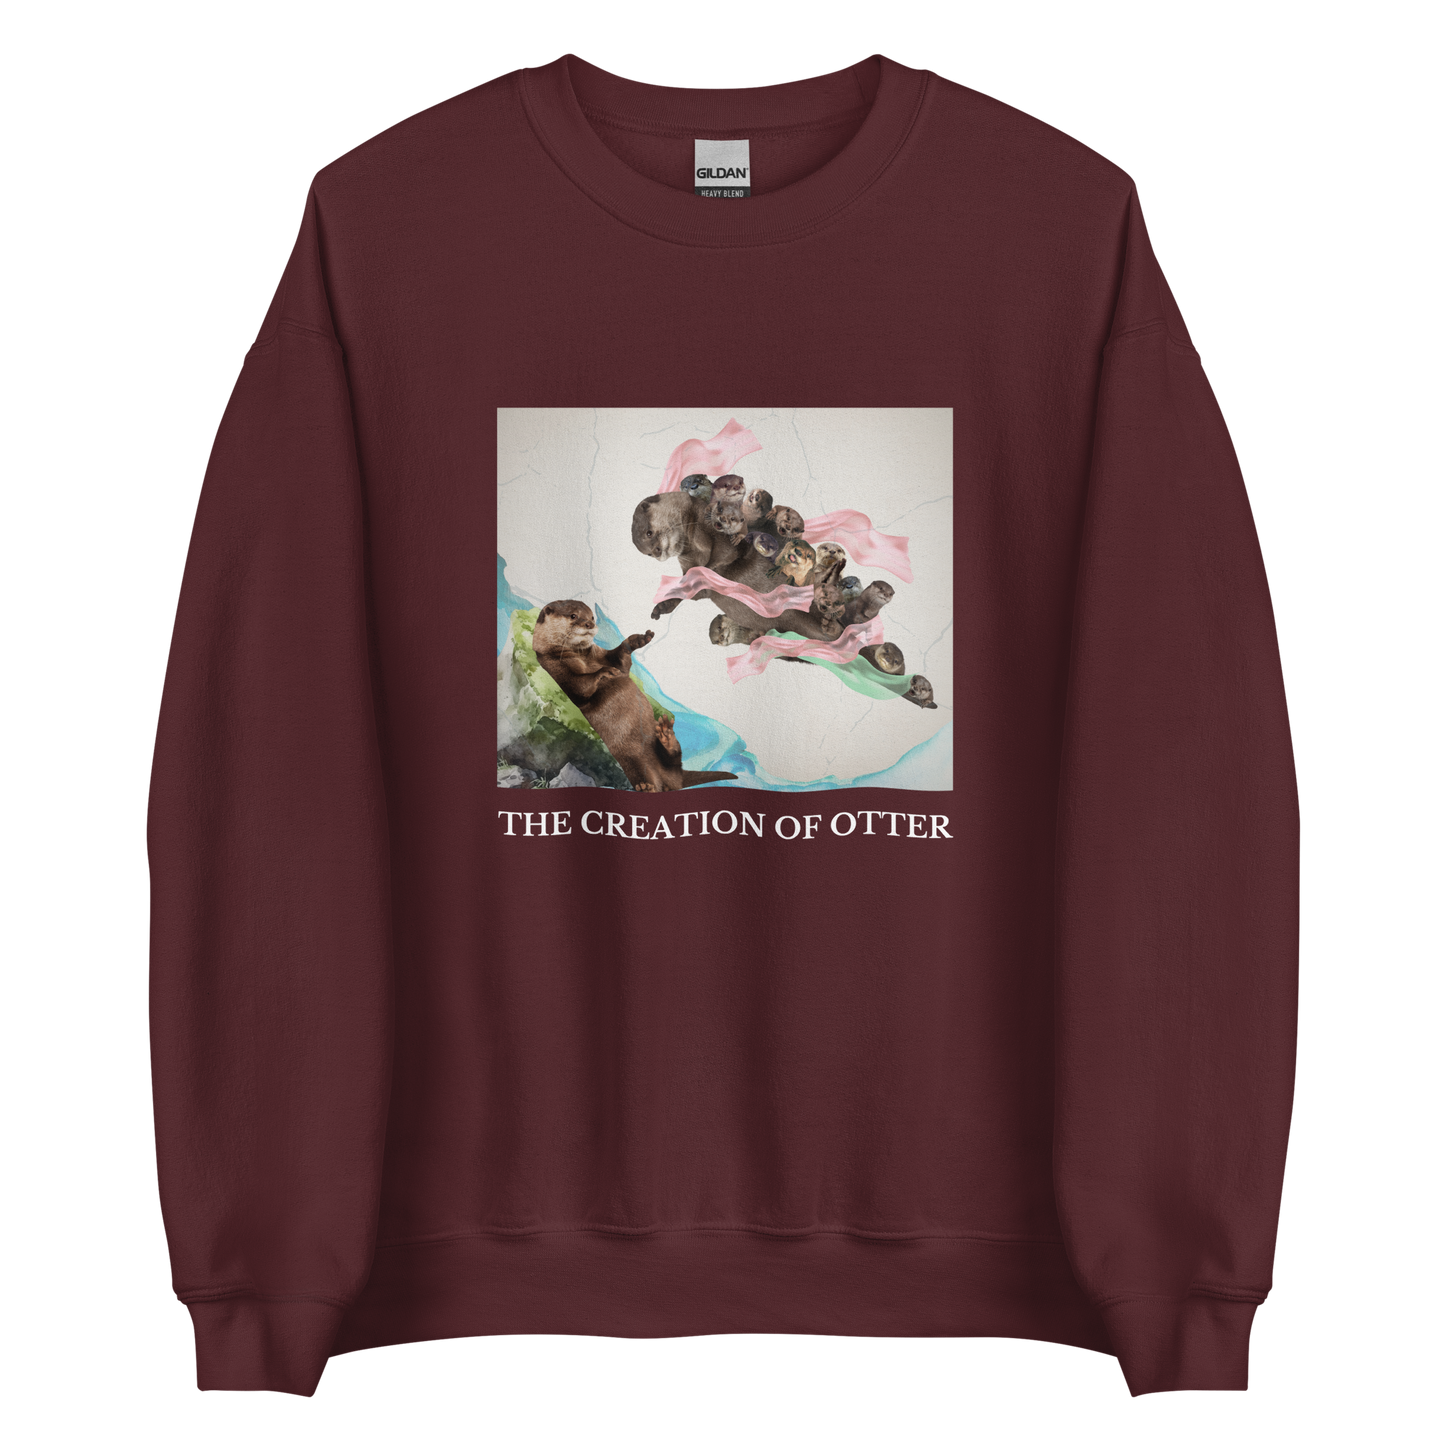 Maroon Otter Sweatshirt featuring a playful The Creation of Otter parody of Michelangelo's masterpiece - Artsy/Funny Graphic Otter Sweatshirts - Boozy Fox